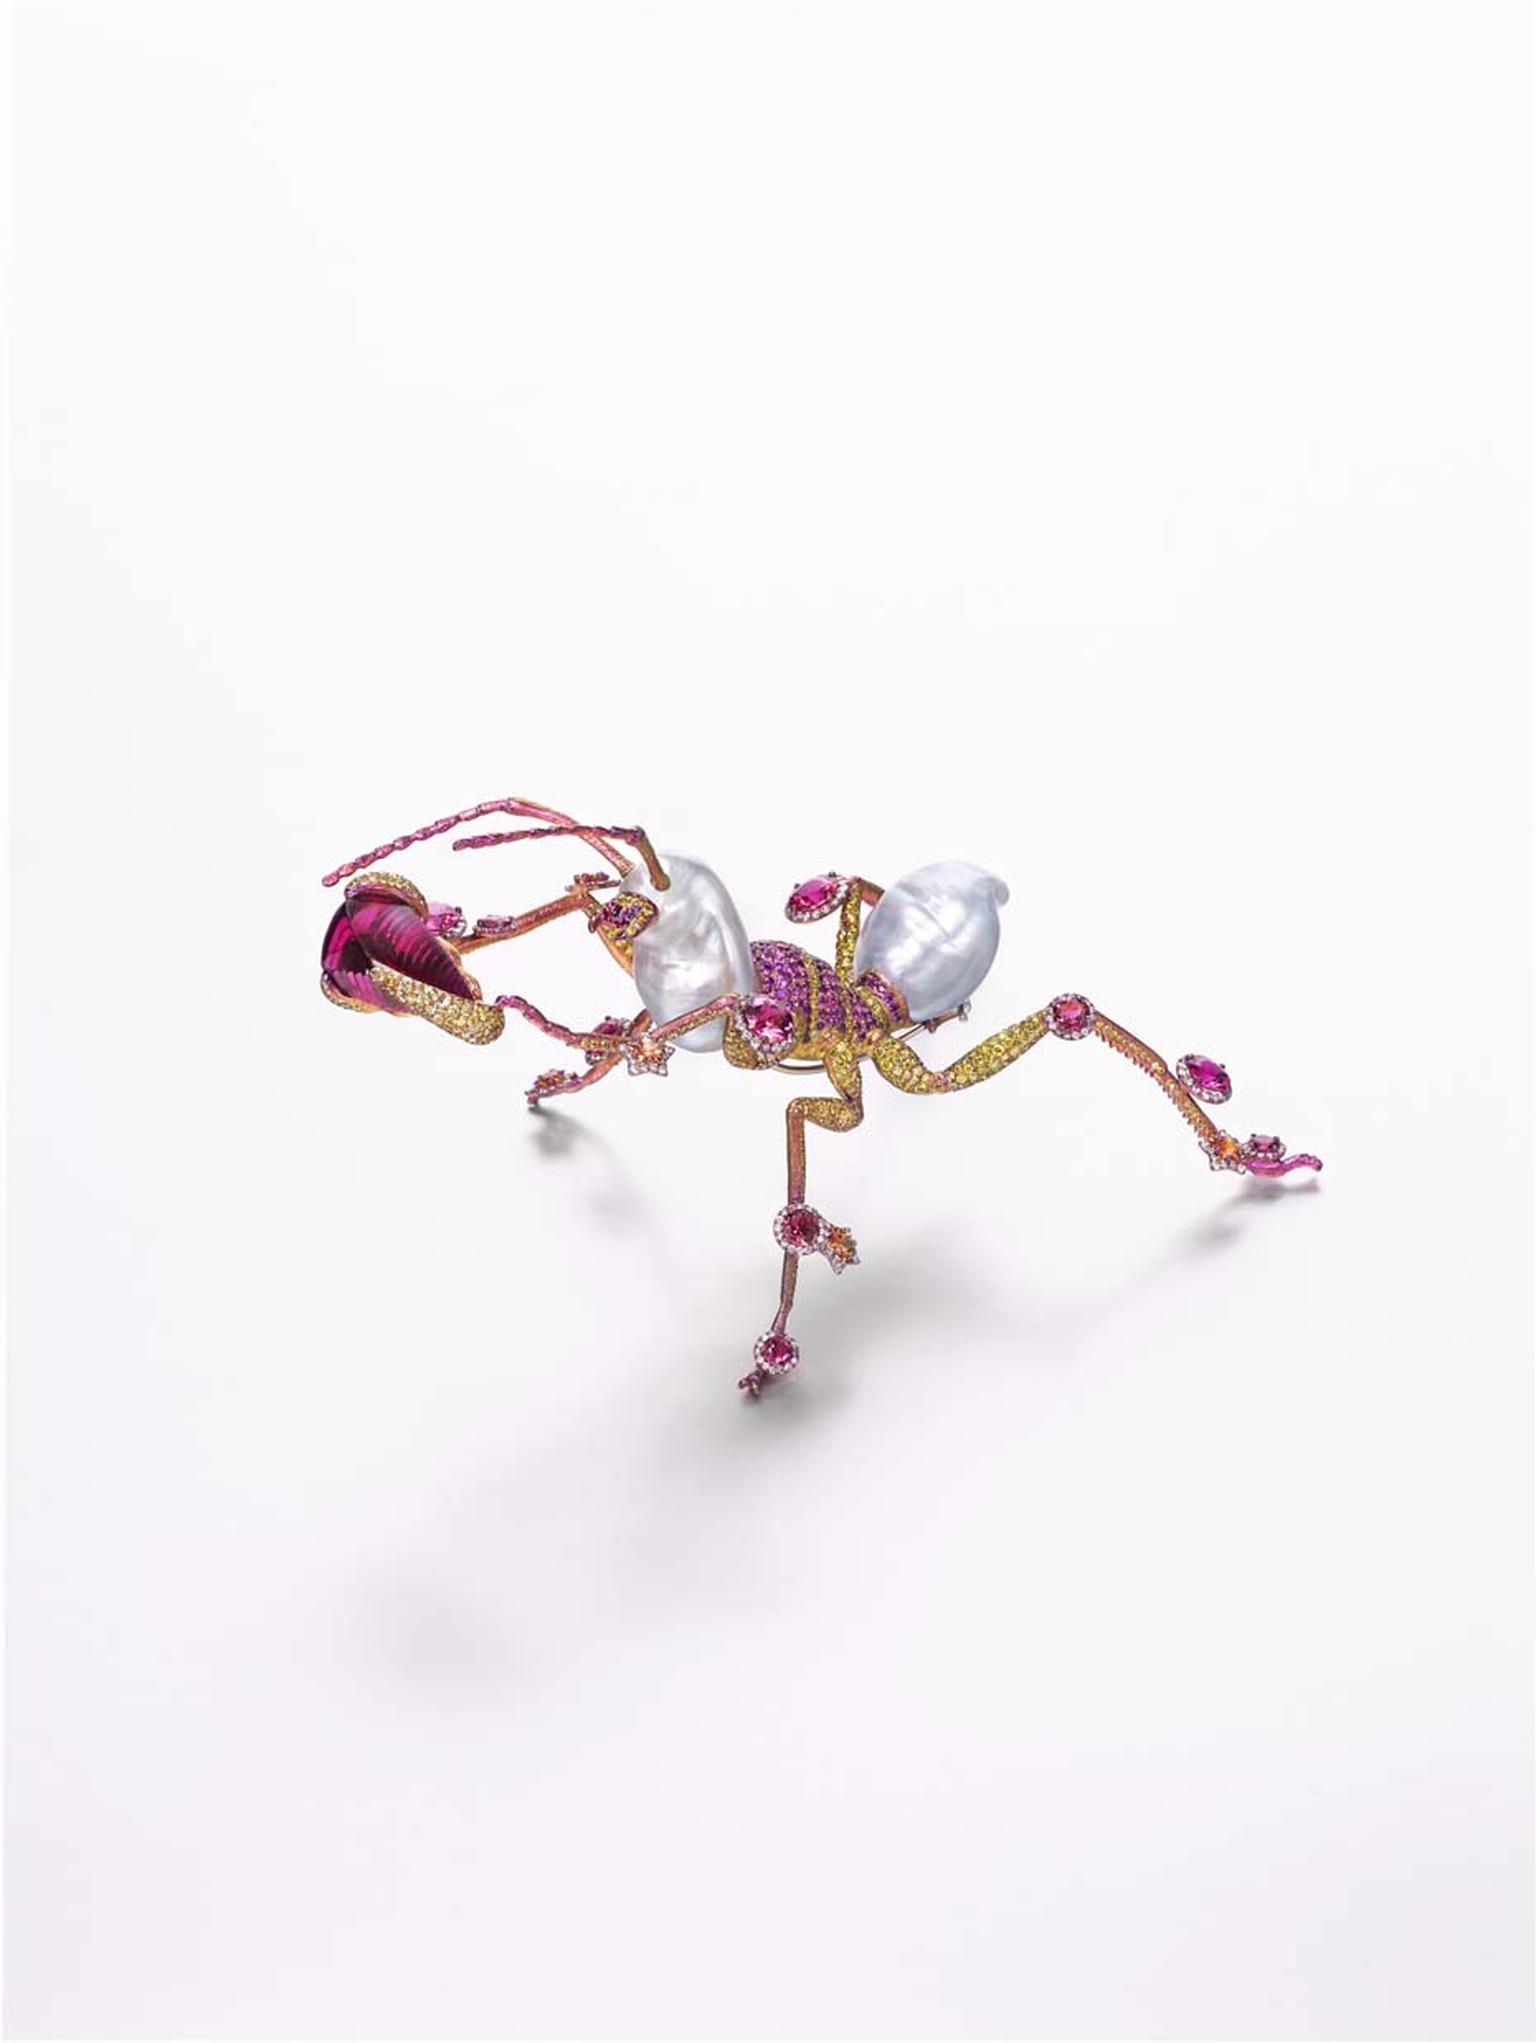 Wallace Chan The Mighty brooch featuring a total of 75.94ct of pearls, 21.41ct of rubellite, yellow sapphires, diamonds, pink sapphires and yellow diamond.